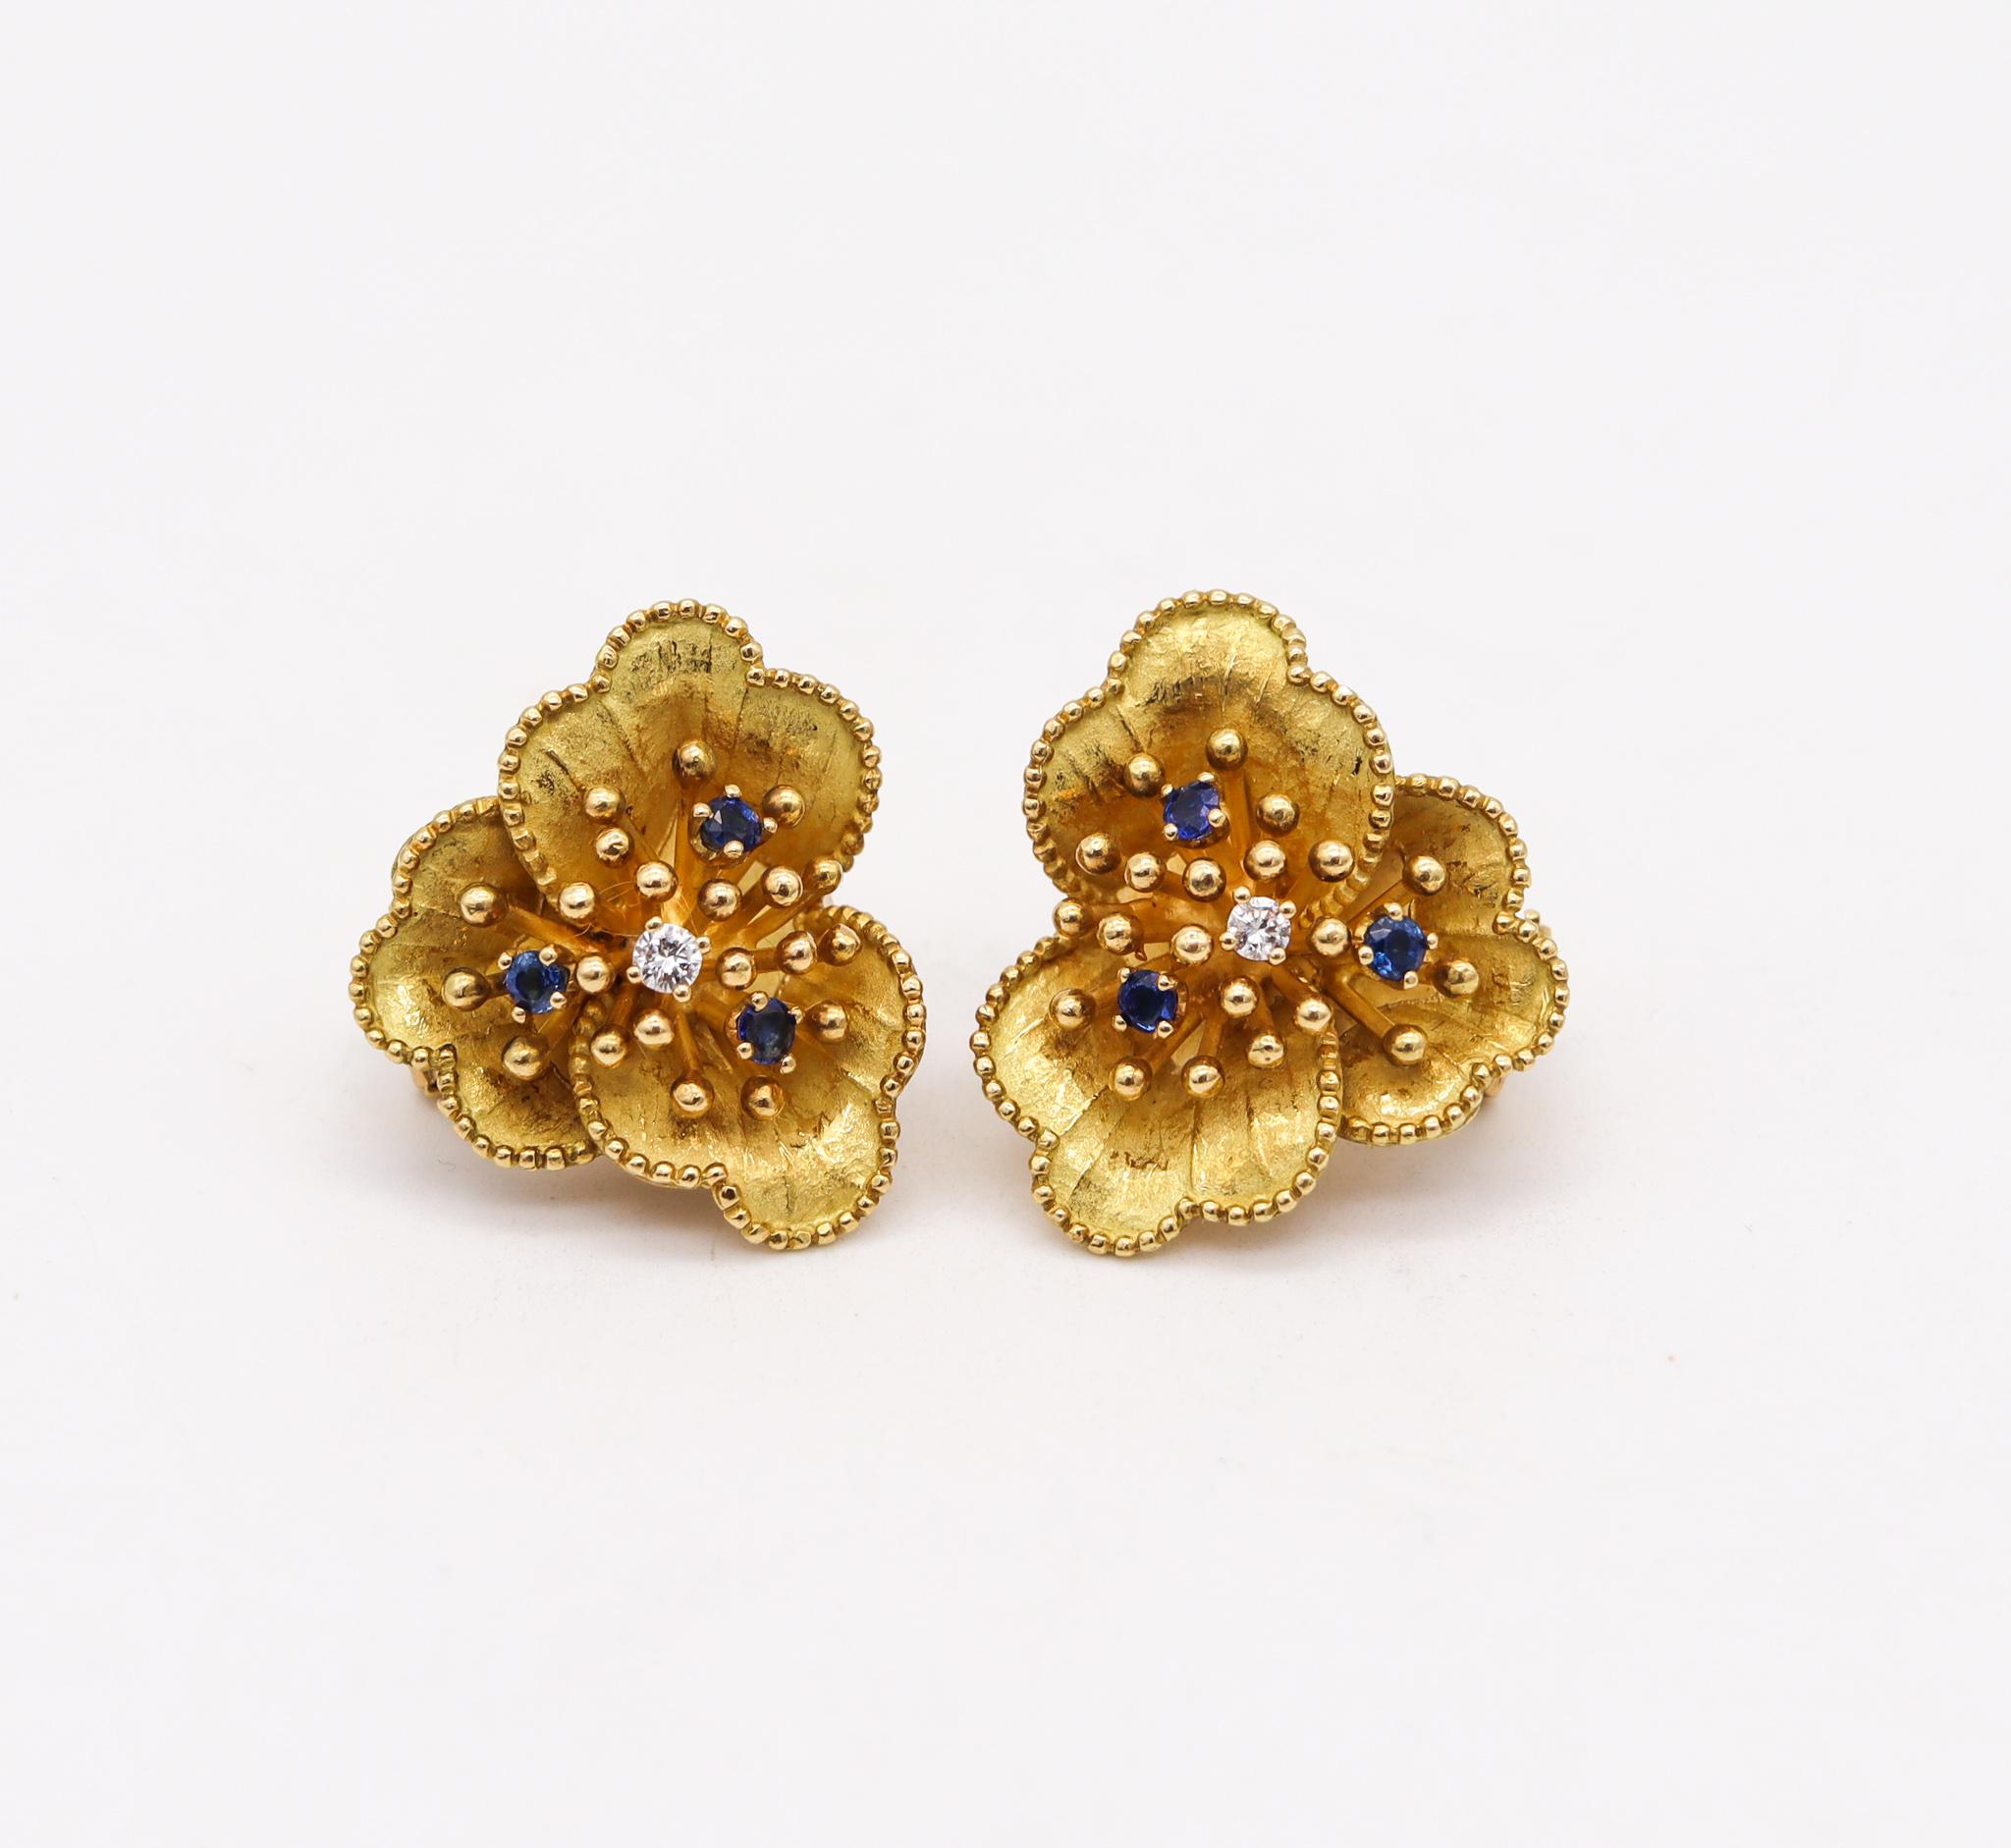 Brilliant Cut Tiffany & Co. 1960 Retro Flowers Earrings in 18kt Gold with Sapphires & Diamonds For Sale